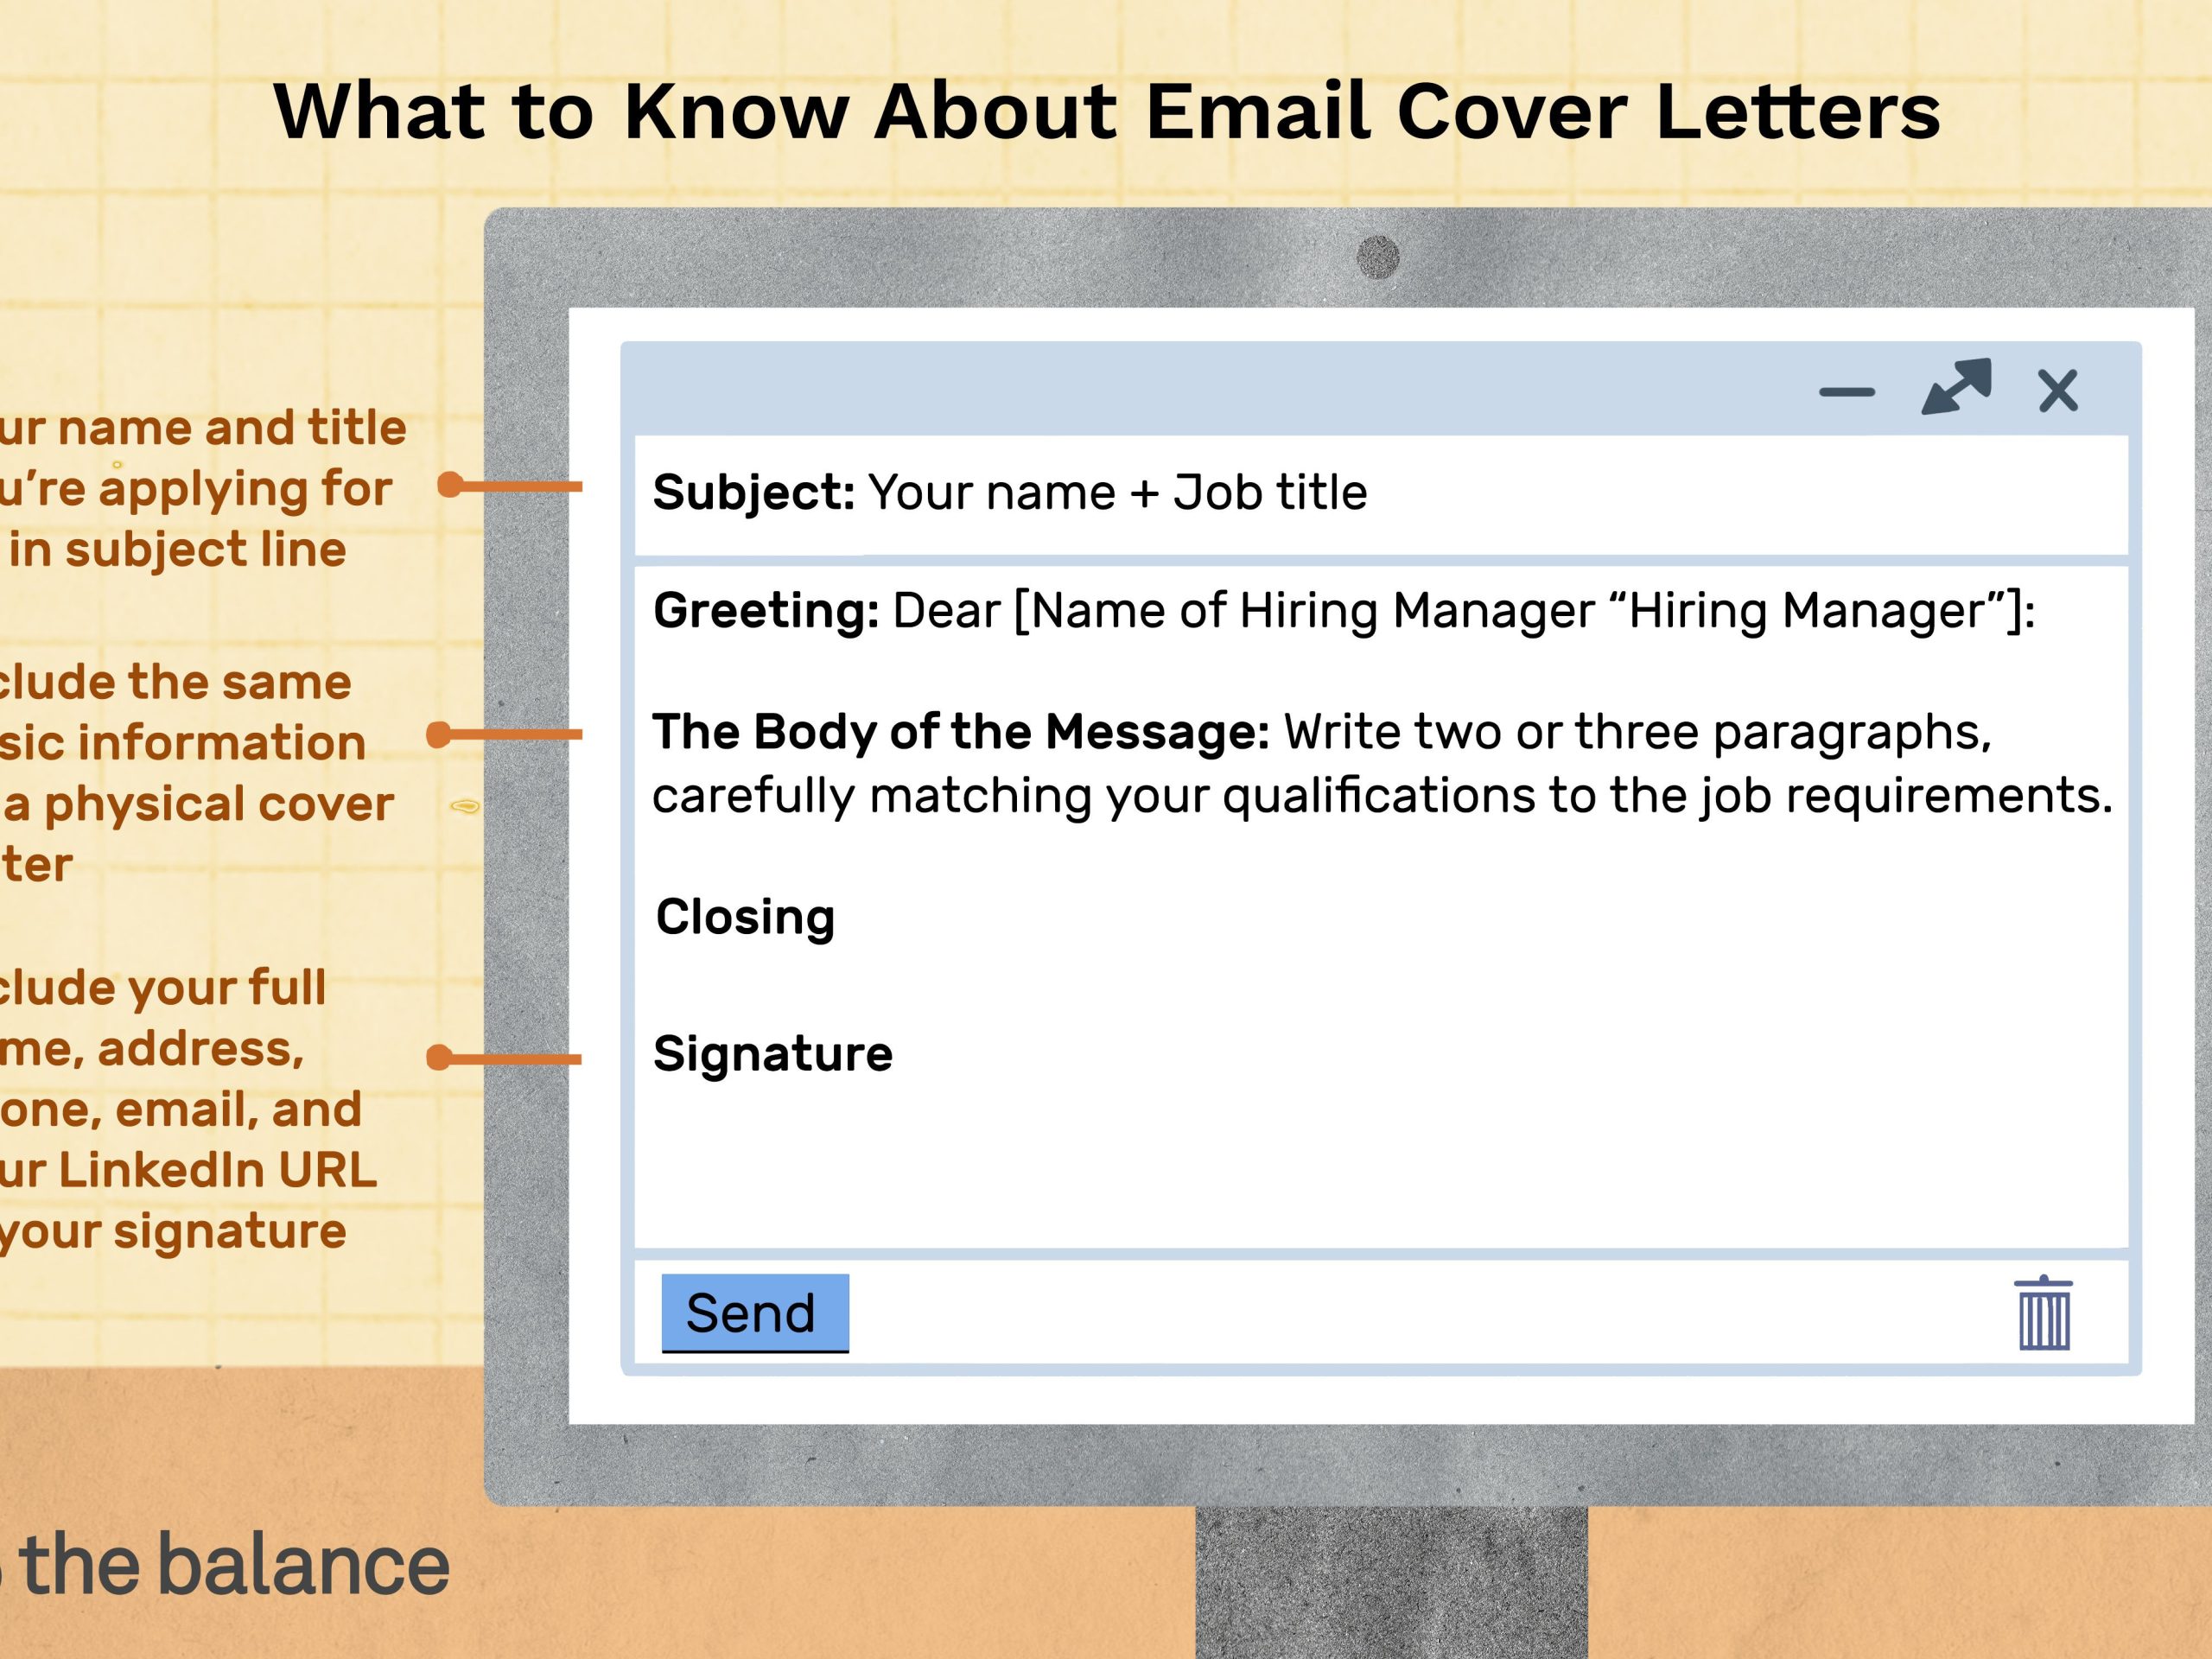 Sample Of Cover Letter for Resume Via Email Sample Email Cover Letter Message for A Hiring Manager